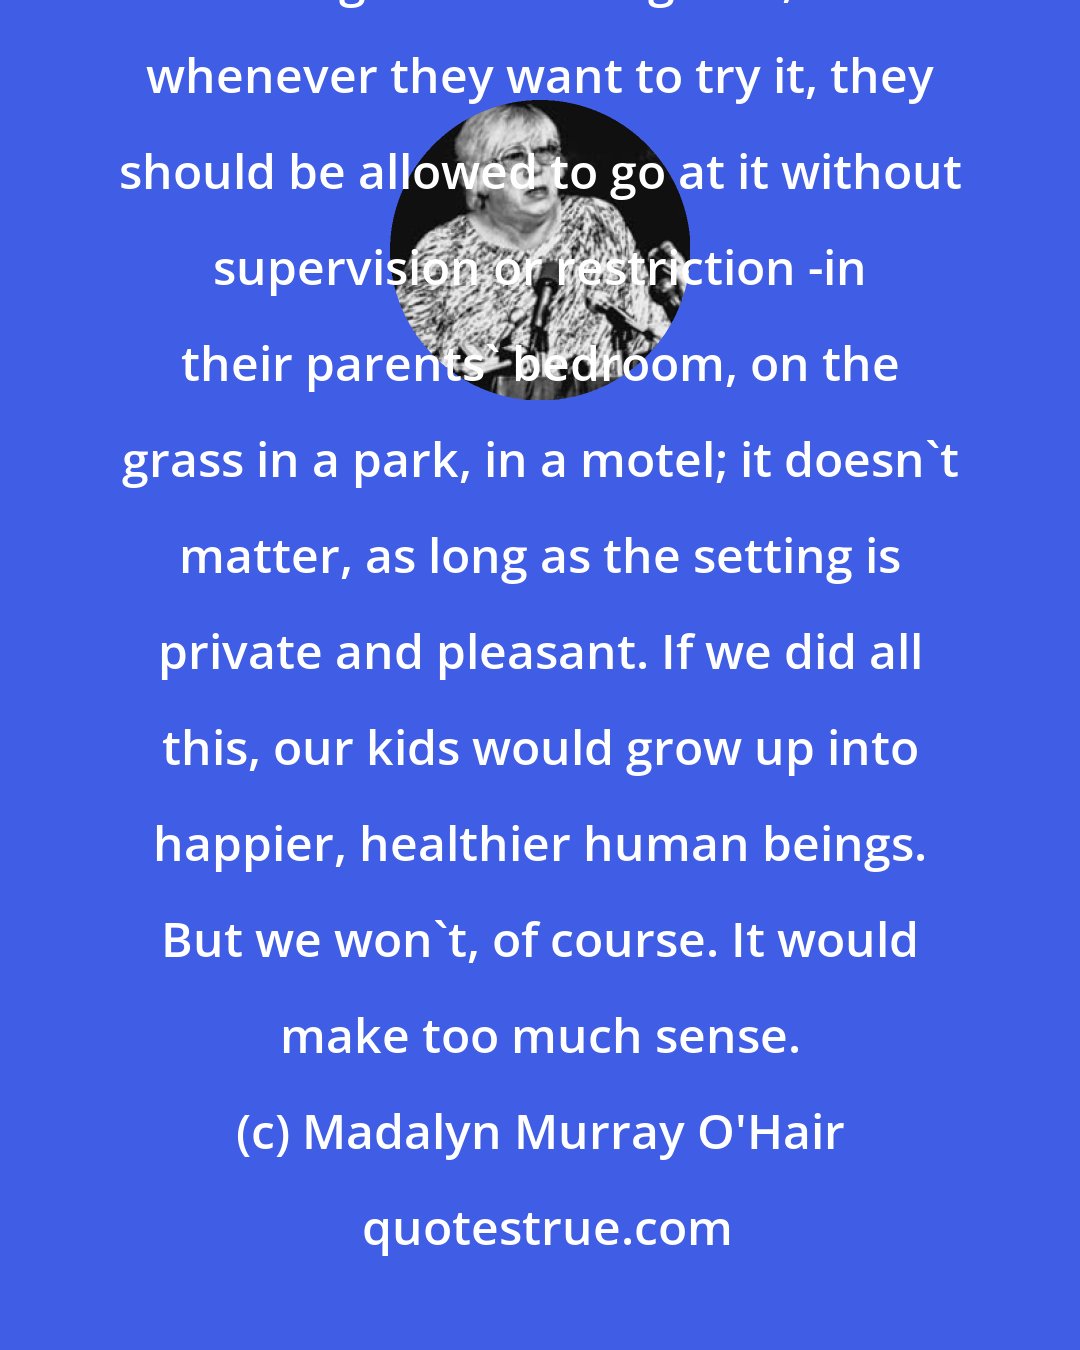 Madalyn Murray O'Hair: Kids should be taught about sex, sex hygiene and contraceptive methods starting in the sixth grade, and whenever they want to try it, they should be allowed to go at it without supervision or restriction -in their parents' bedroom, on the grass in a park, in a motel; it doesn't matter, as long as the setting is private and pleasant. If we did all this, our kids would grow up into happier, healthier human beings. But we won't, of course. It would make too much sense.